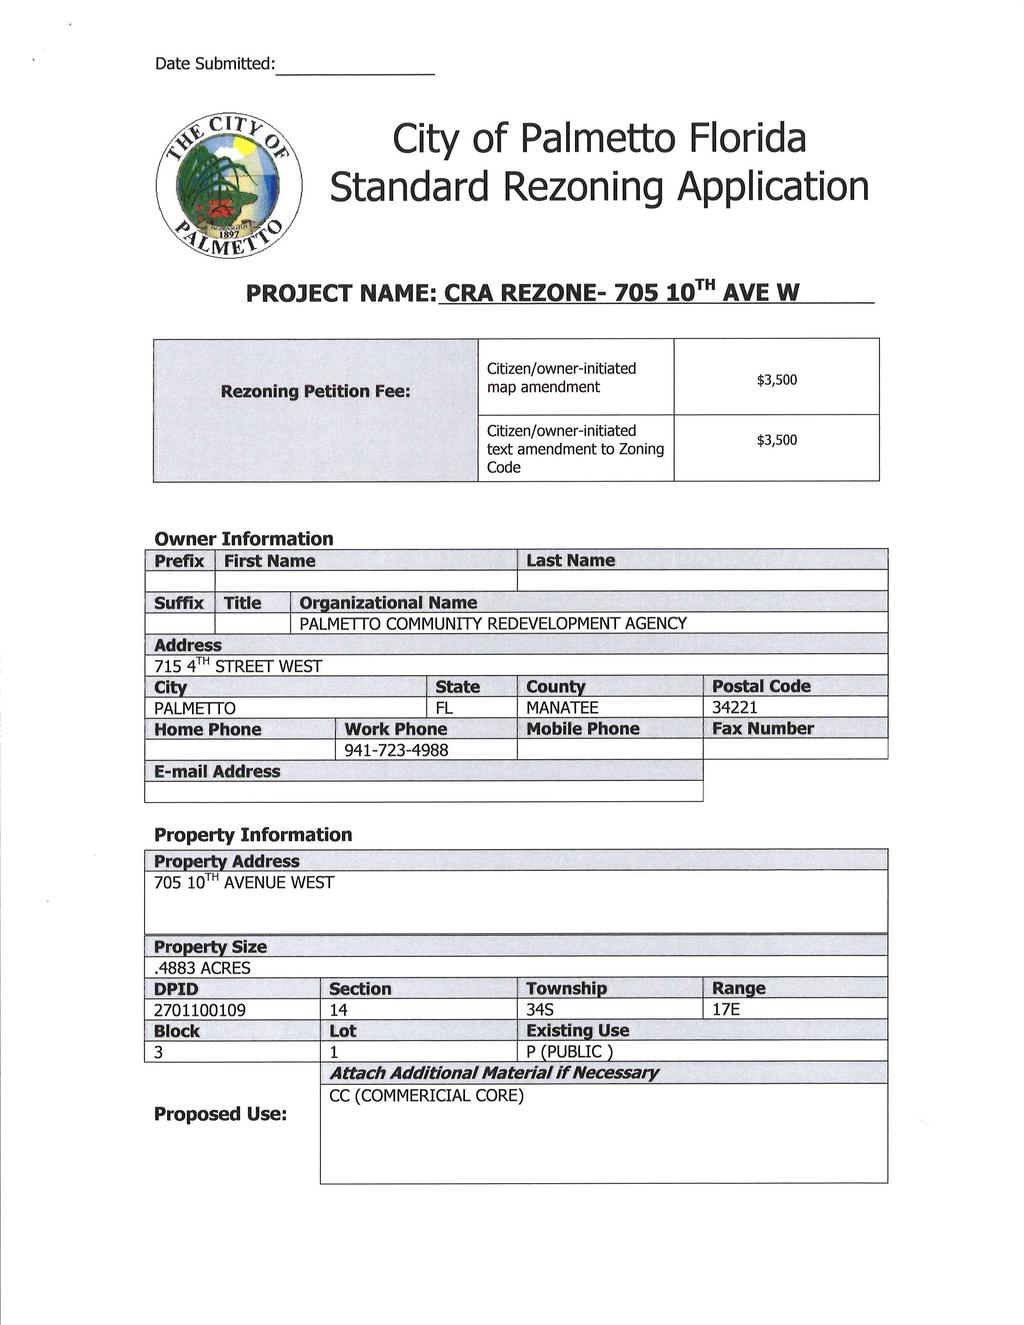 Date Submitted: City of Palmetto Florida Standard Rezoning Application 3 o PROJECT NAME: CRA REZONE- 705 10TH AVE W Rezoning Petition Fee: Citizen /owner - initiated map amendment 3, 500 Citizen